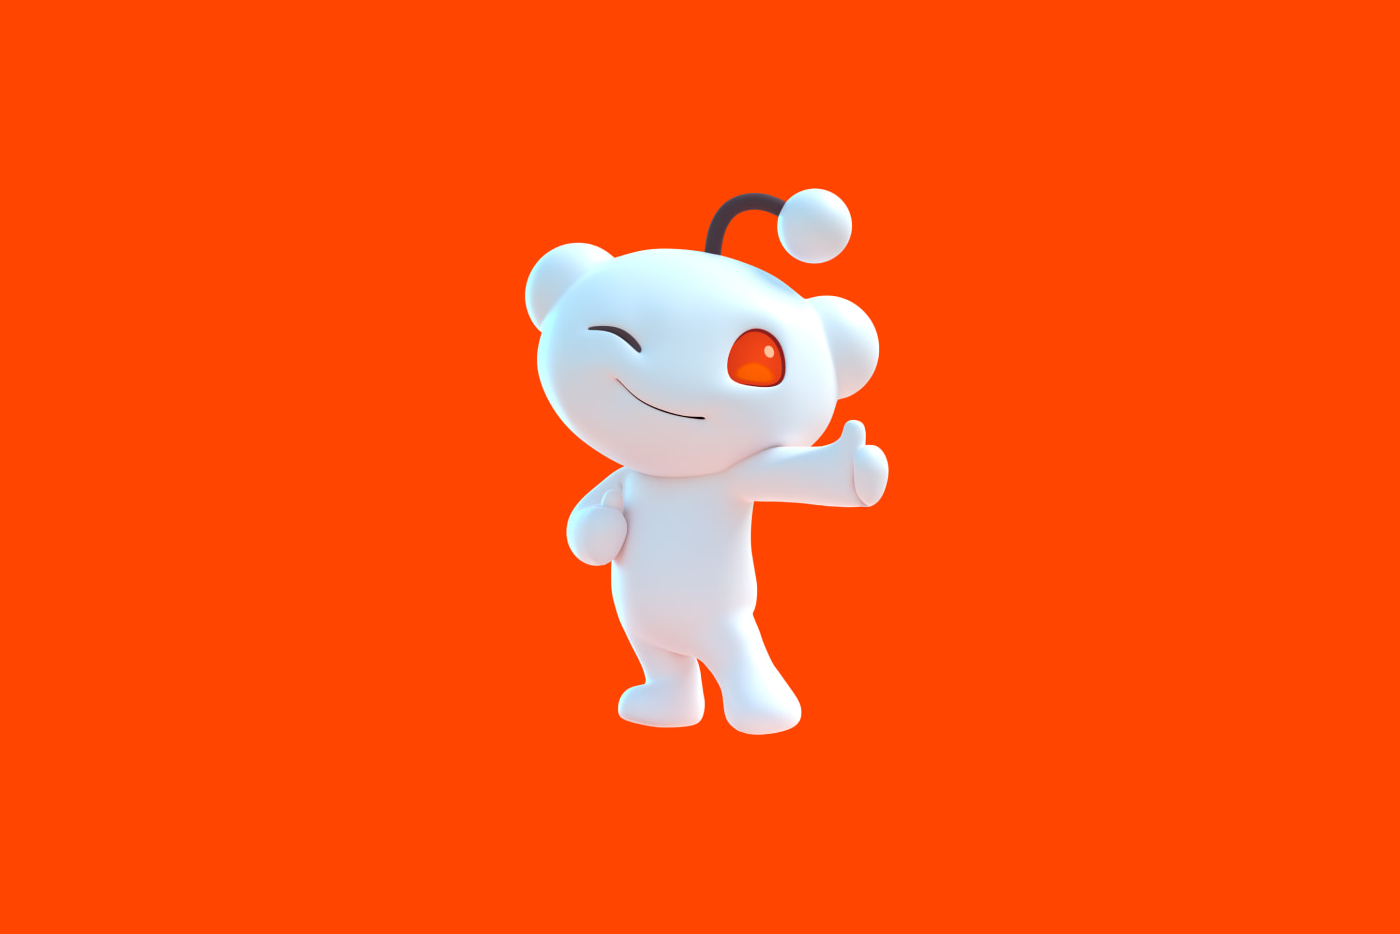 Reddit Has Refreshed Its Brand: Evolve the Future